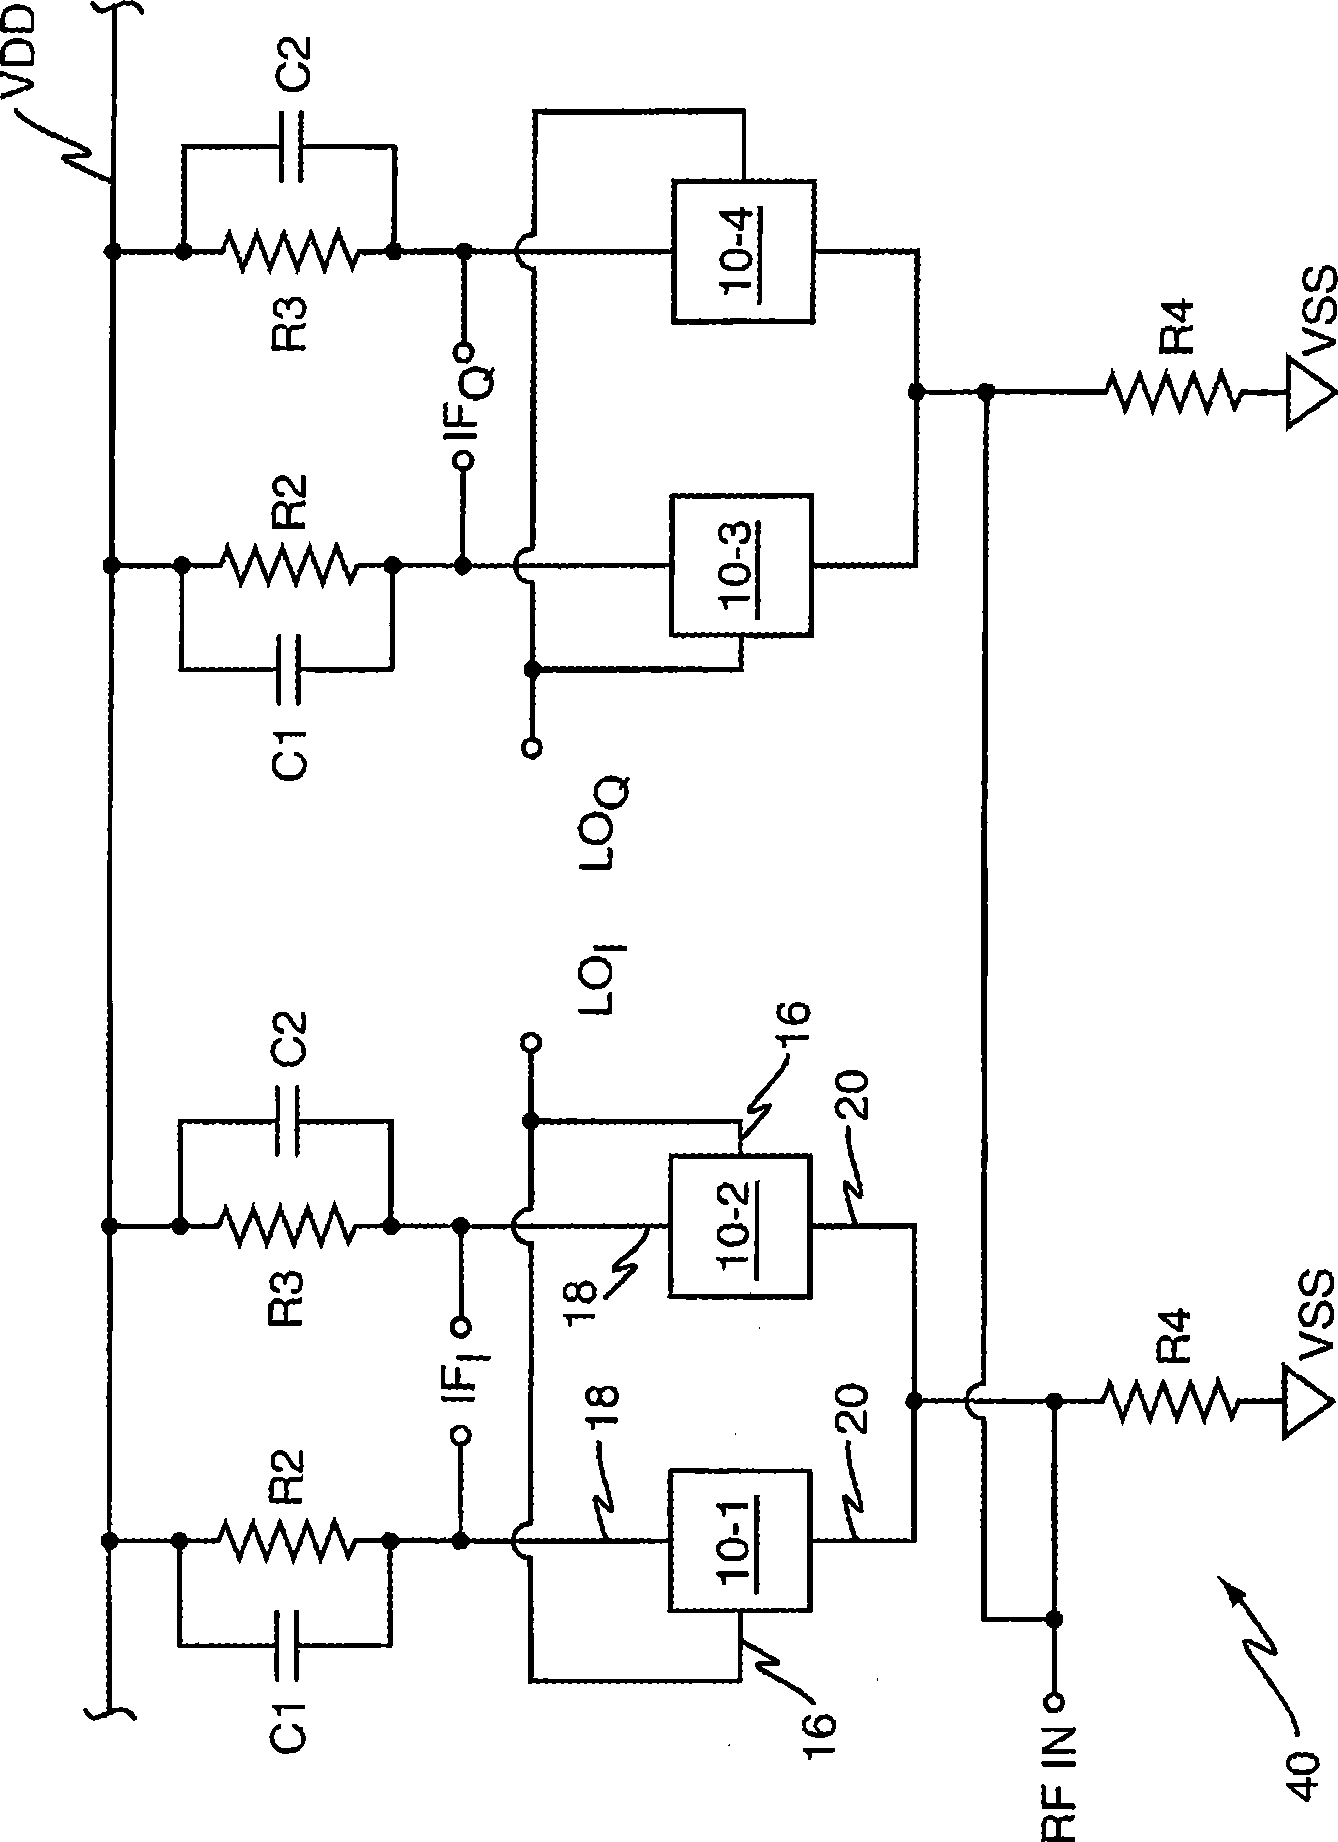 Apparatus and method for exploiting reverse short channel effects in transistor devices